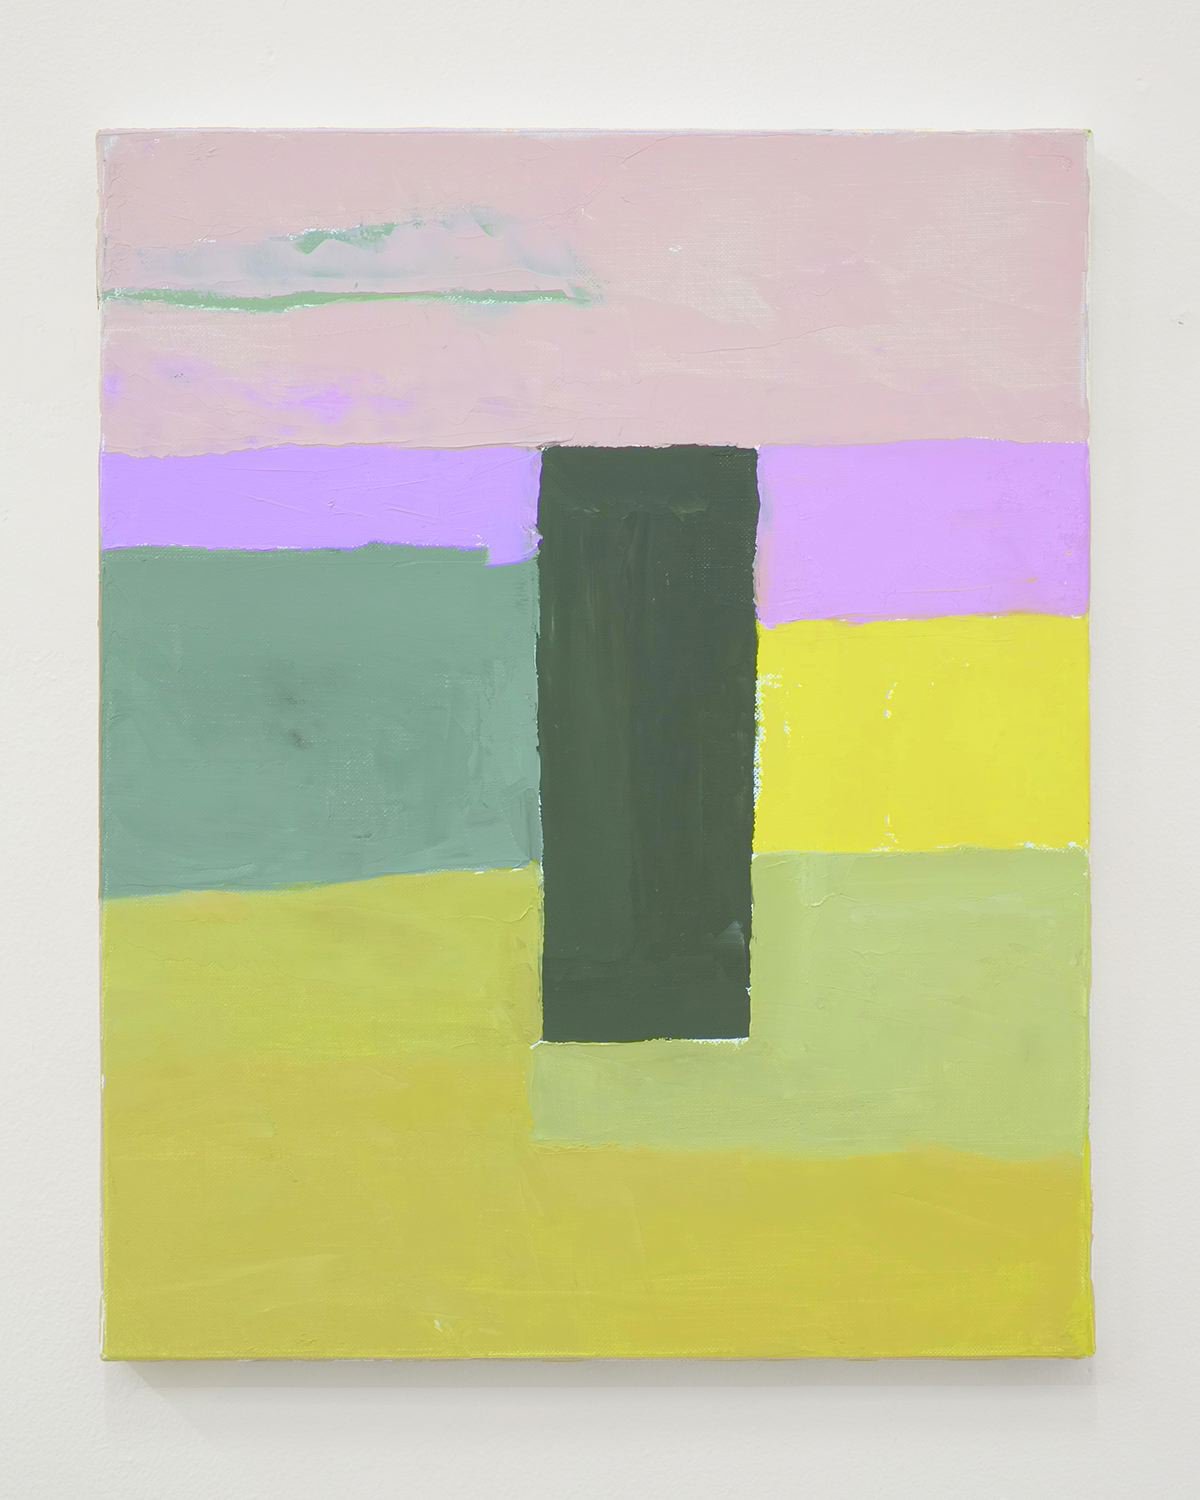 Etel Adnan, Untitled, 2019.Oil on canvas, 40.6 x 33 cm.Courtesy of the Artist and Private Collection.